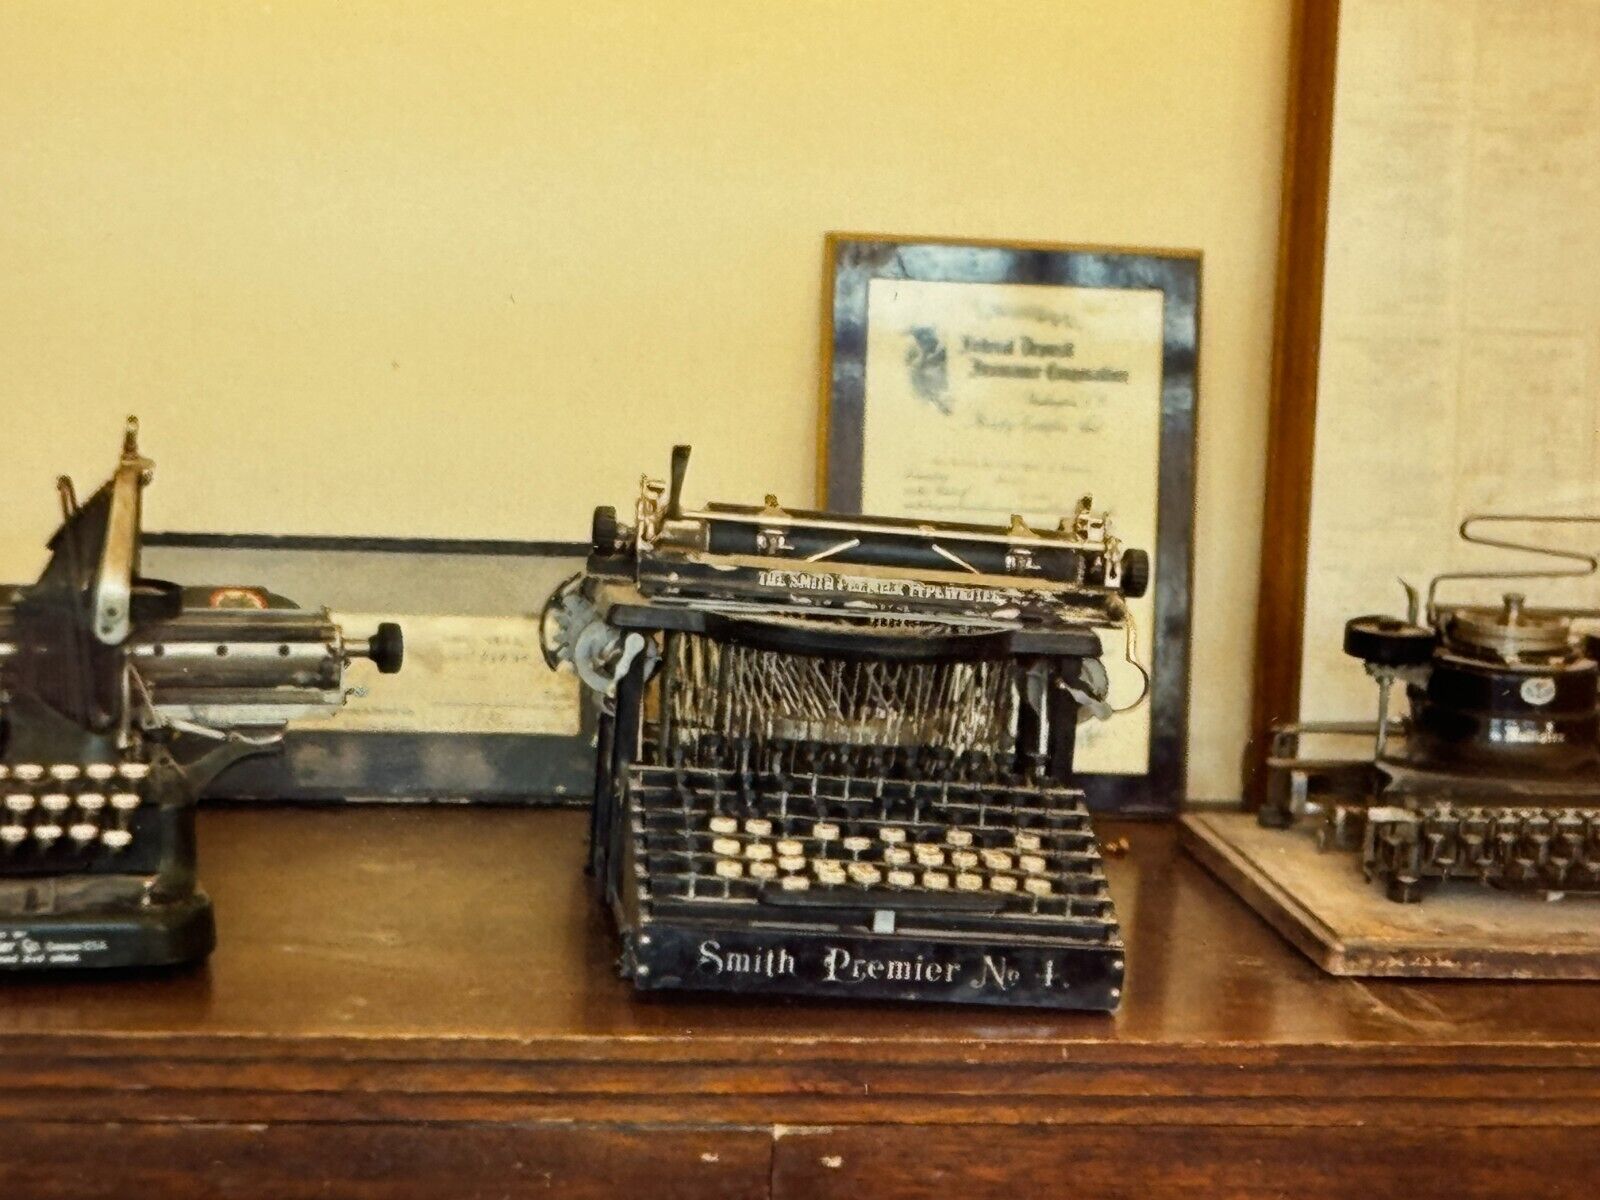 2E Photograph Of Old Antique Typewriters On Display Smith Premier No. 1